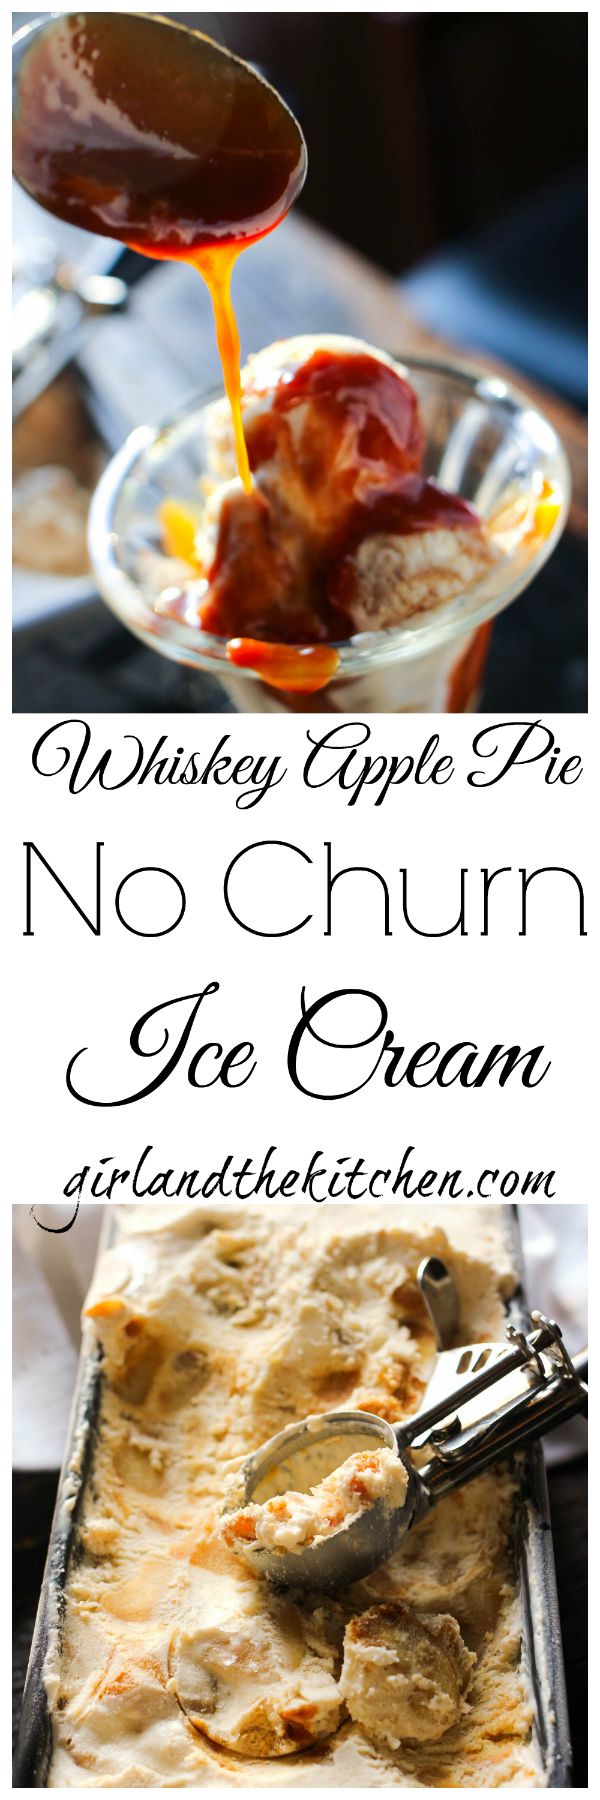 Delicious and creamy no-churn ice cream sweetened with chunks of whiskey soaked caramelized apples and shortbread cookies.